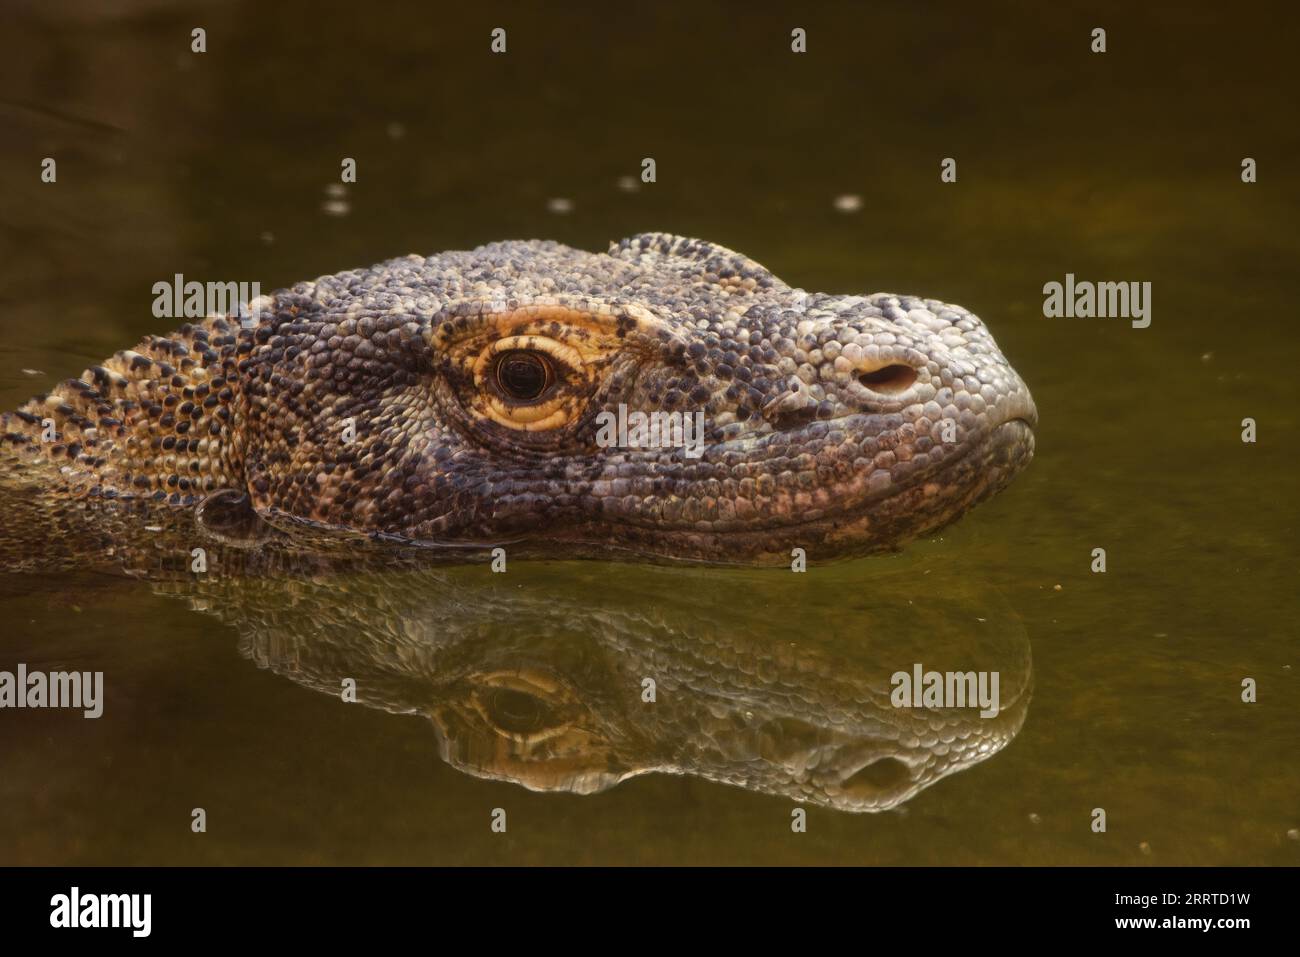 Portrait of the head of a Komodo Dragon,Varanus komodoensis, in water with reflection Stock Photo